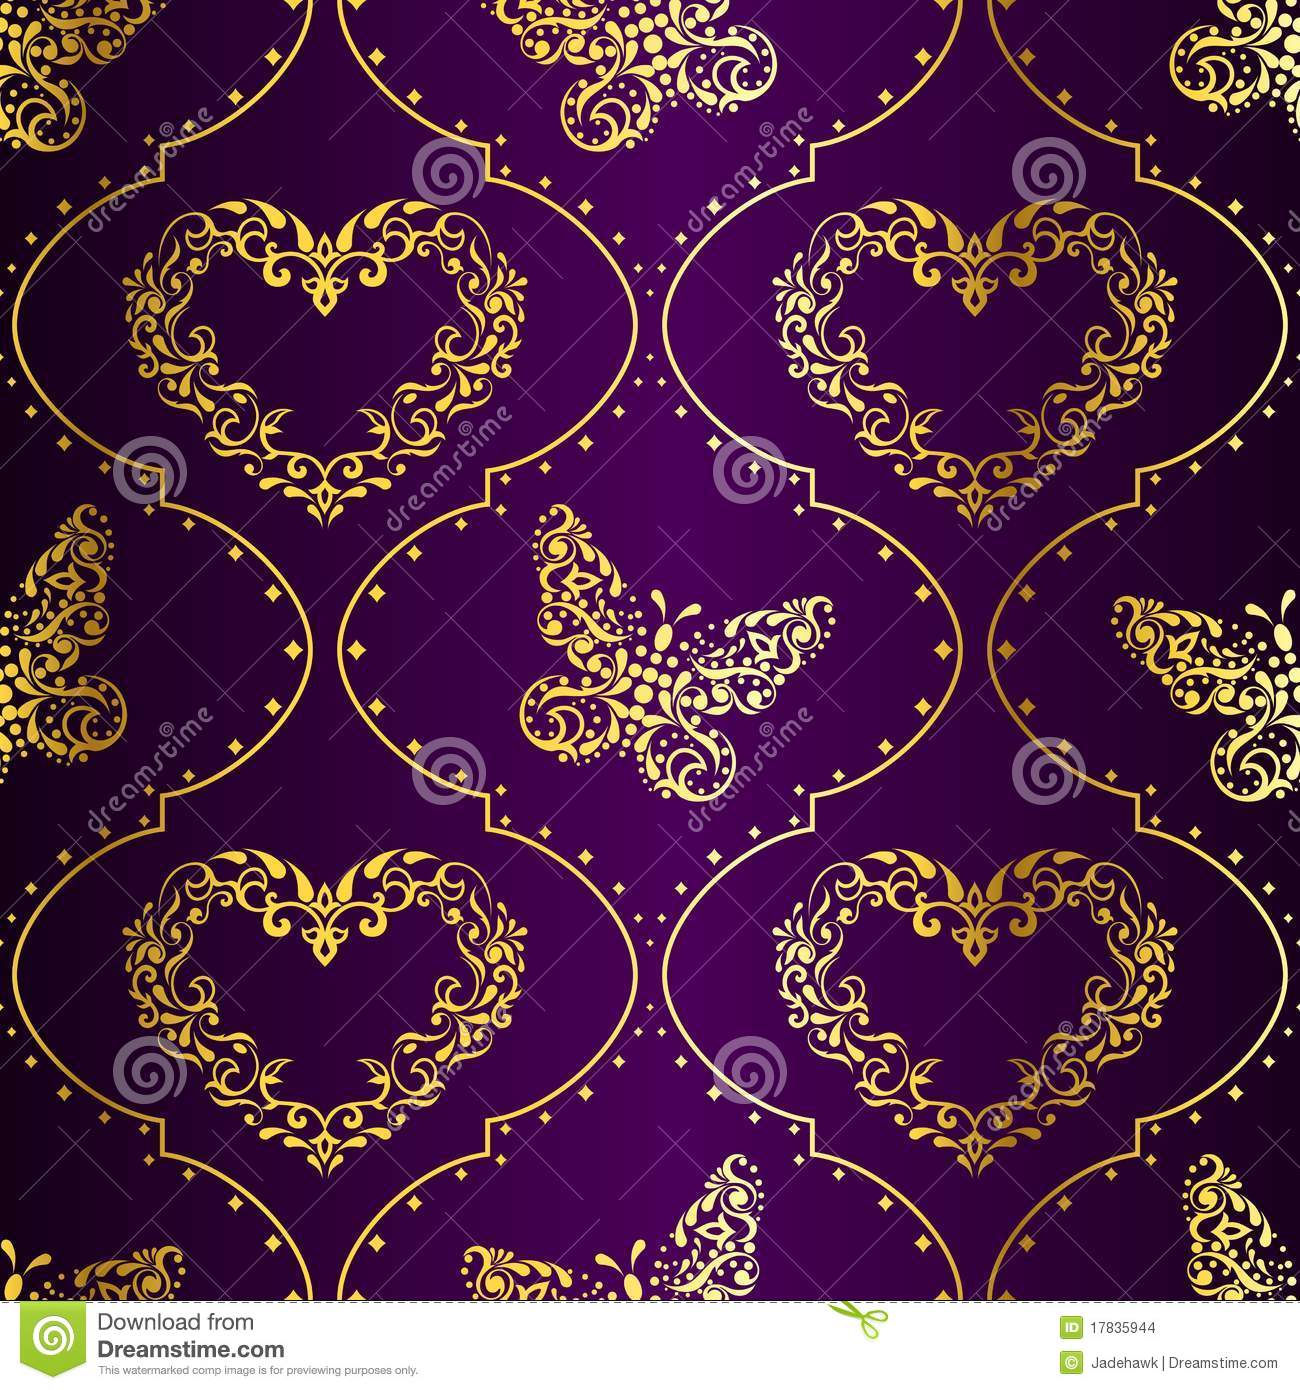 15 Purple And Gold Background Design Images   Purple and